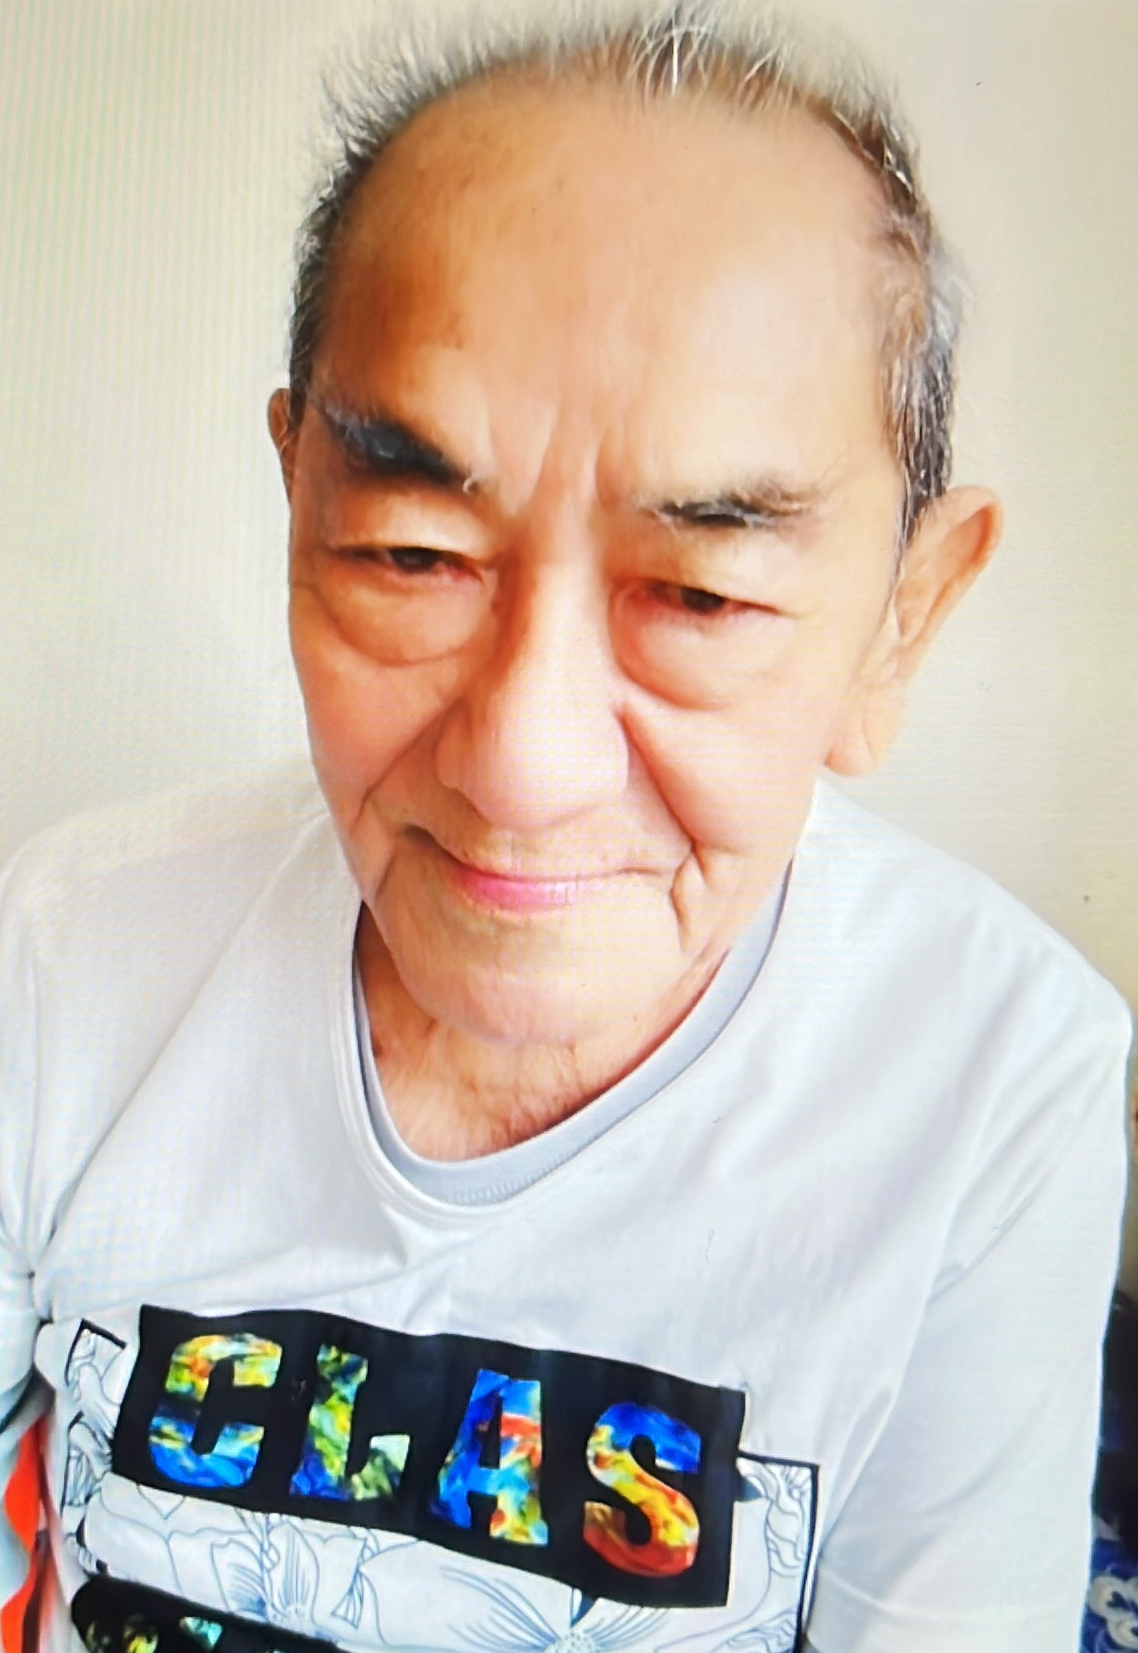 Lee Chung-shing, aged 84, is about 1.7 metres tall and of thin build. He has a long face with yellow complexion and short gray and black hair. He was last seen wearing a white T-shirt, black trousers and black shoes.